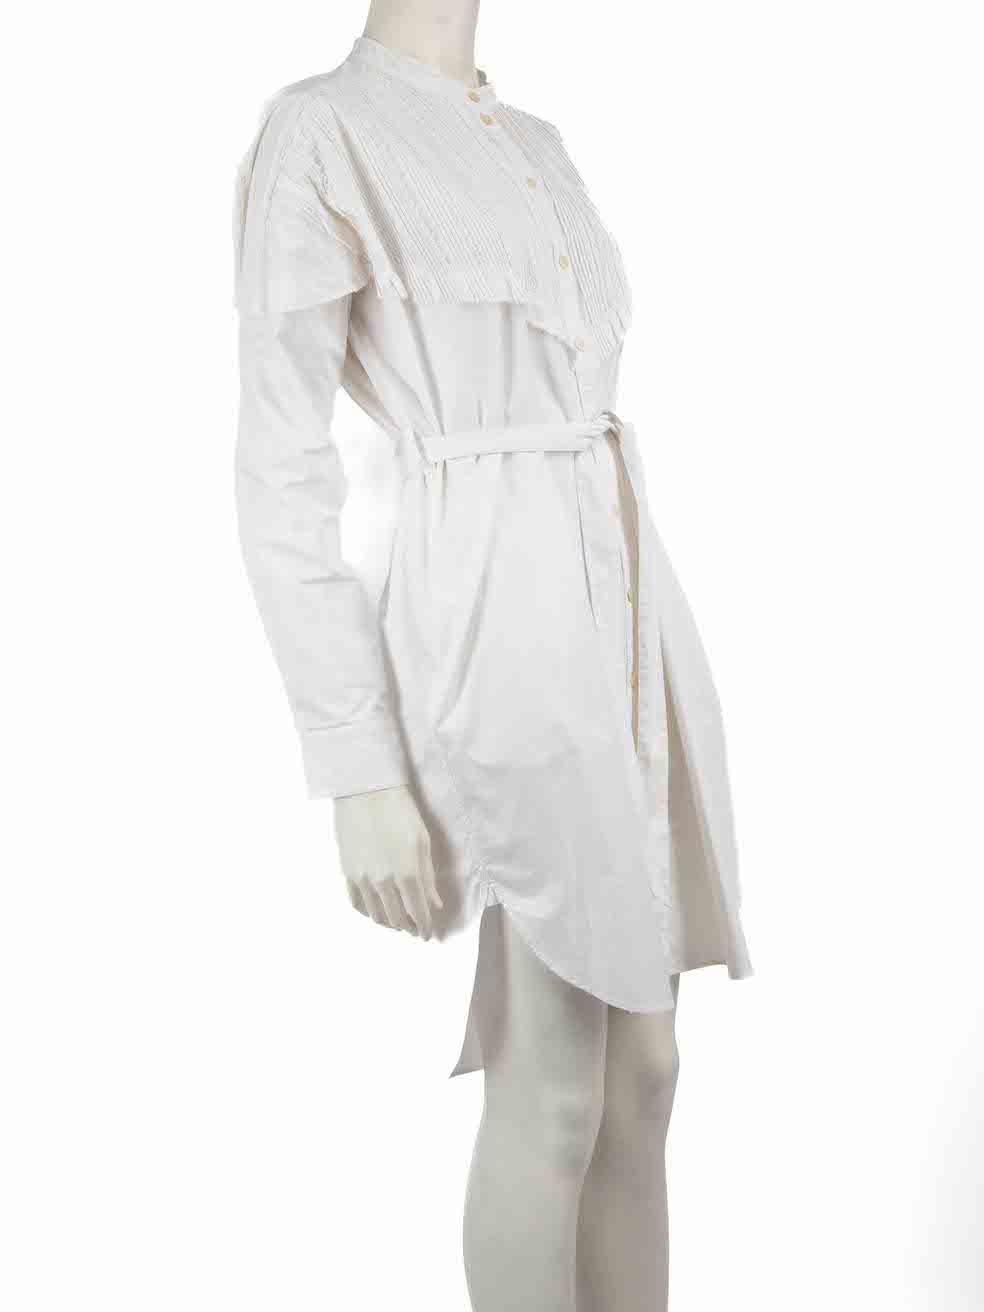 CONDITION is Very good. Minimal wear to dress is evident. Minimal wear to the rear neckline lining with faint discoloured mark on this used Burberry designer resale item.
 
 Details
 White
 Cotton
 Shirt dress
 Knee length
 Lace trimmed
 Front